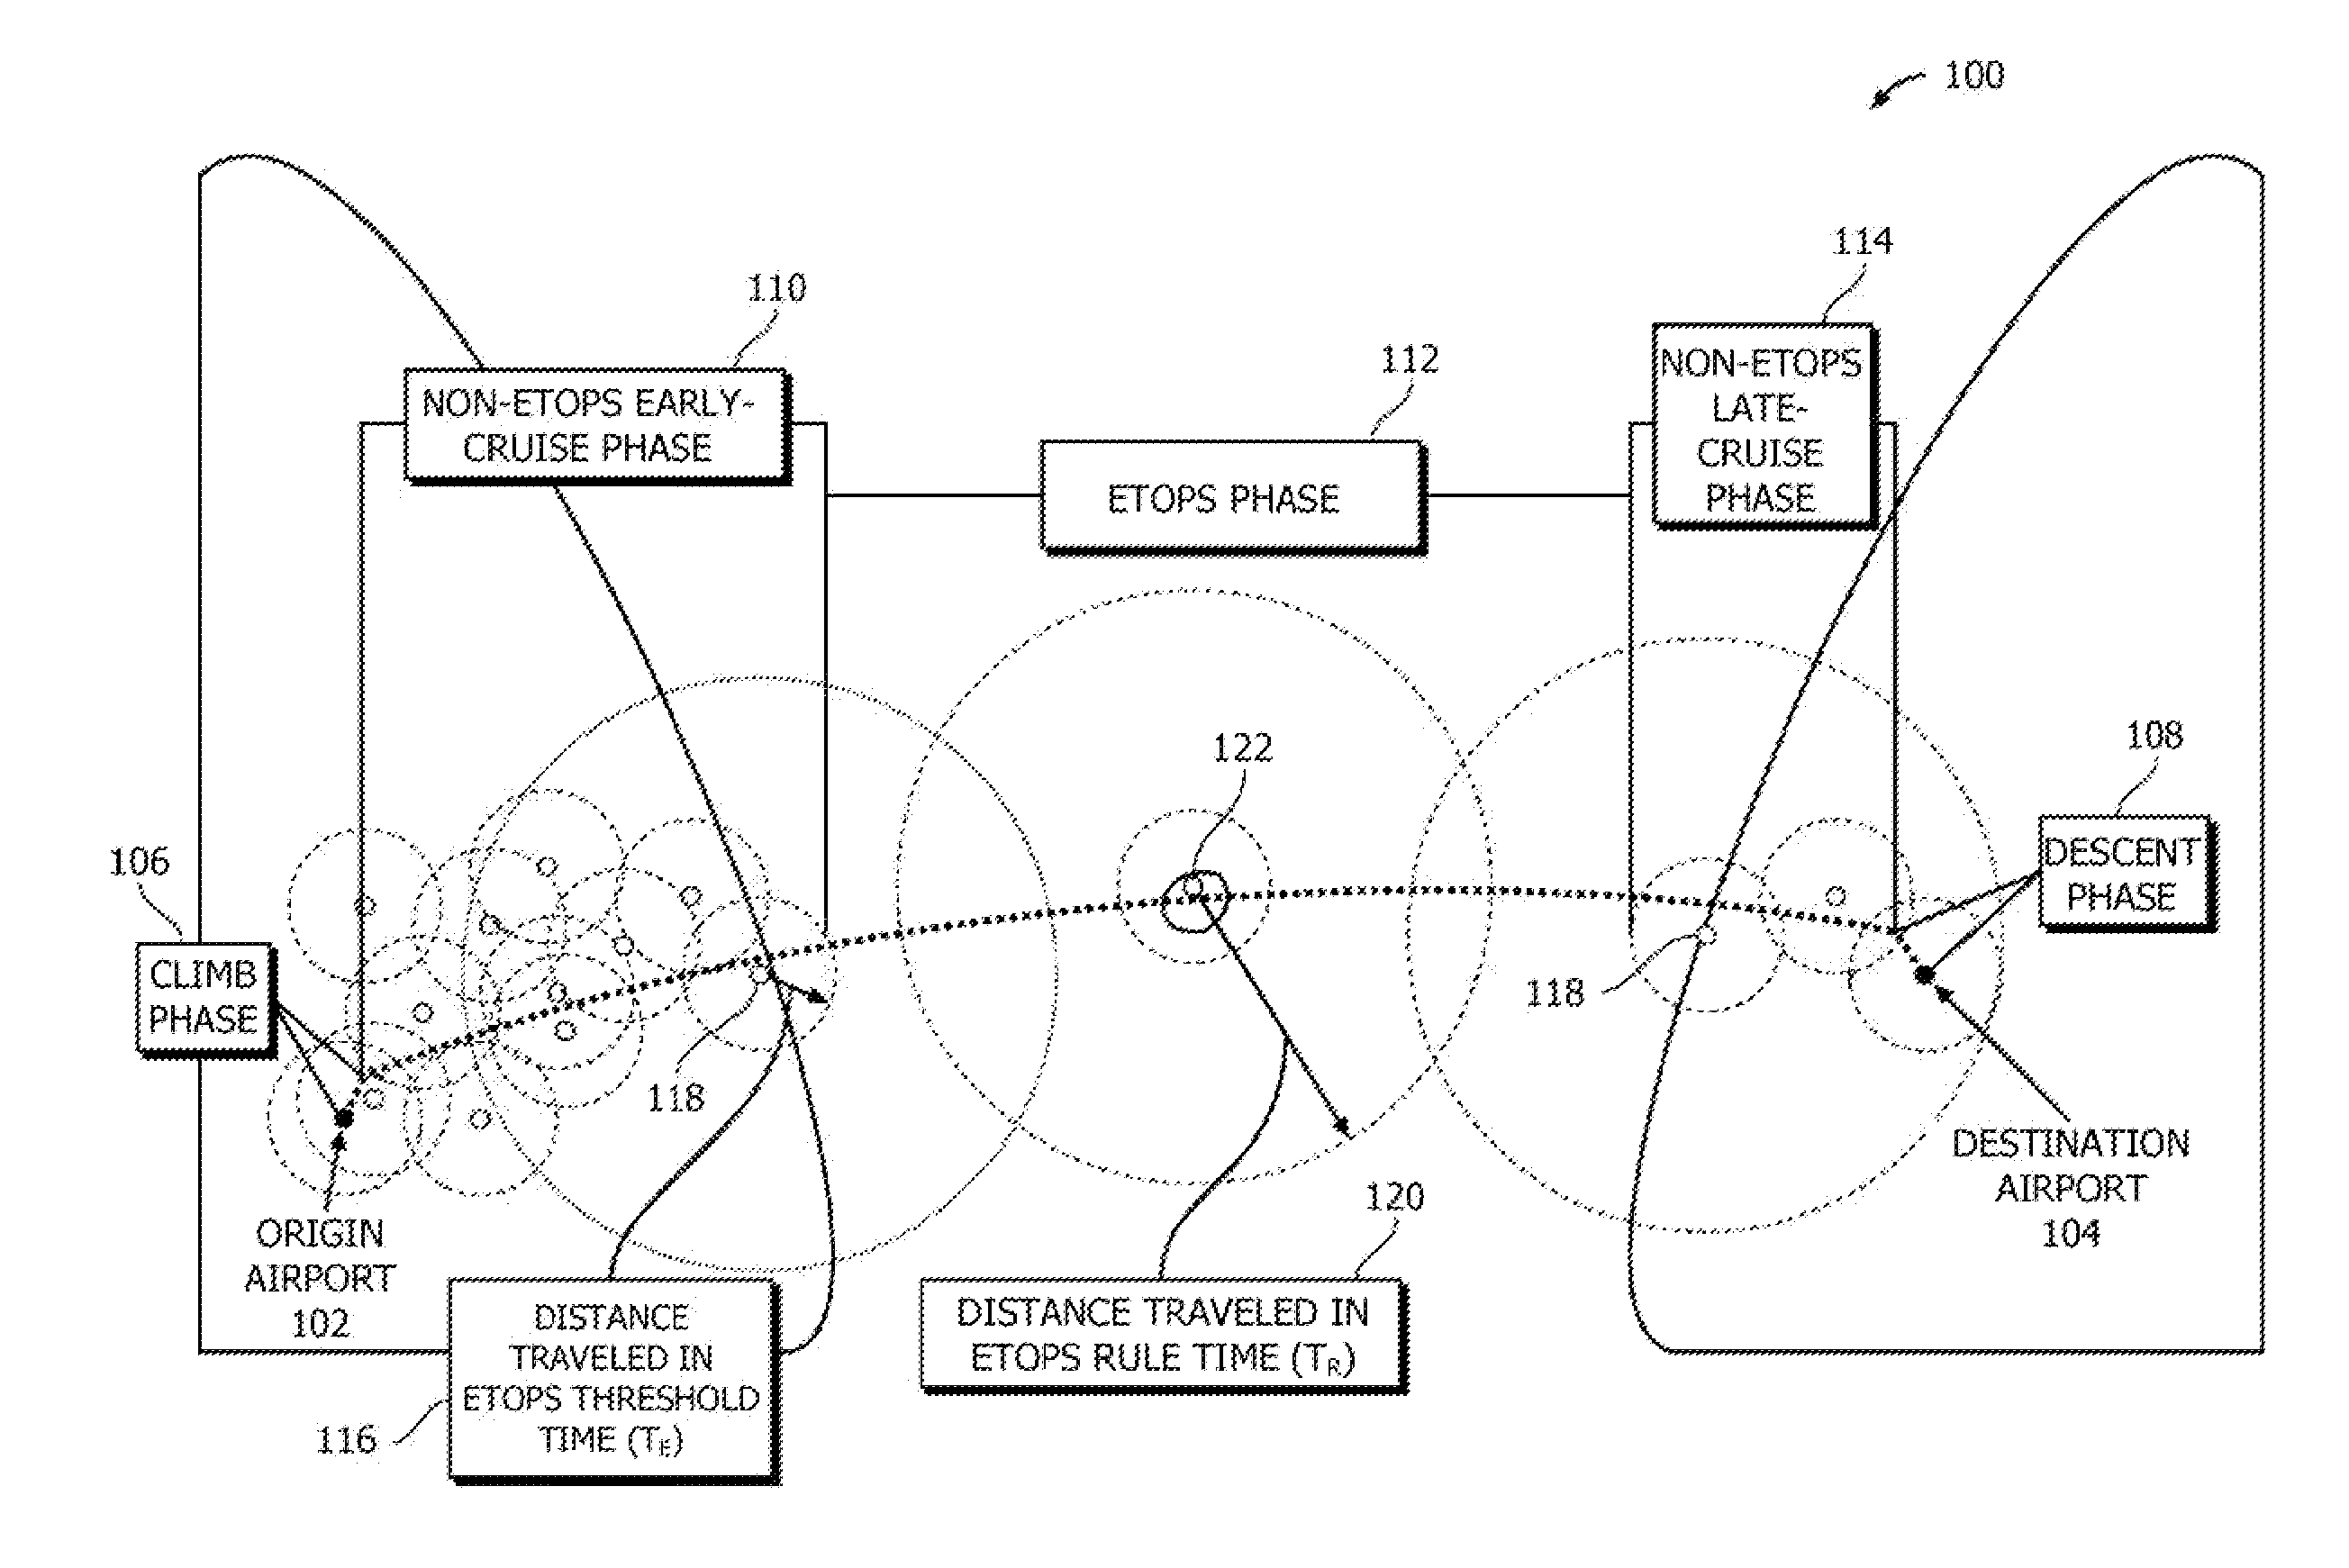 Establishing availability of a two-engine aircraft for an etops flight or an etops flight path for a two-engine aircraft